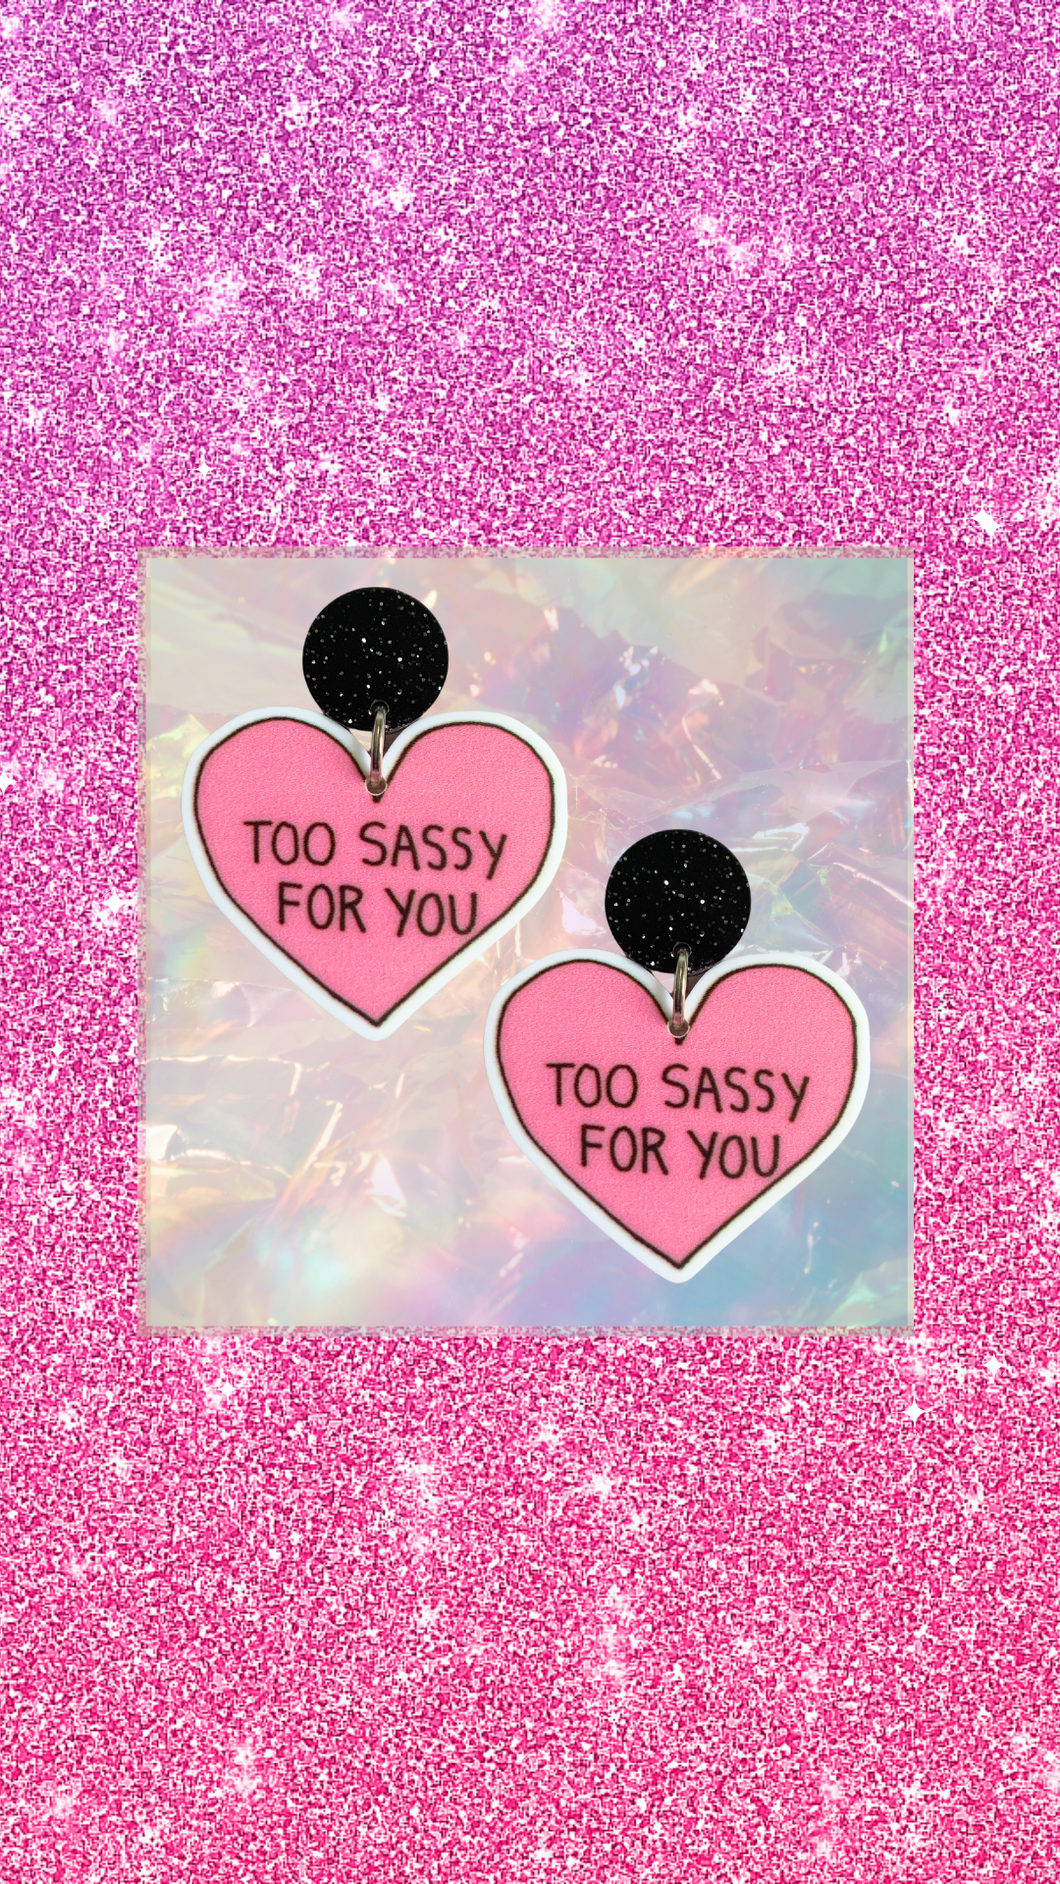 Too Sassy for You Earrings